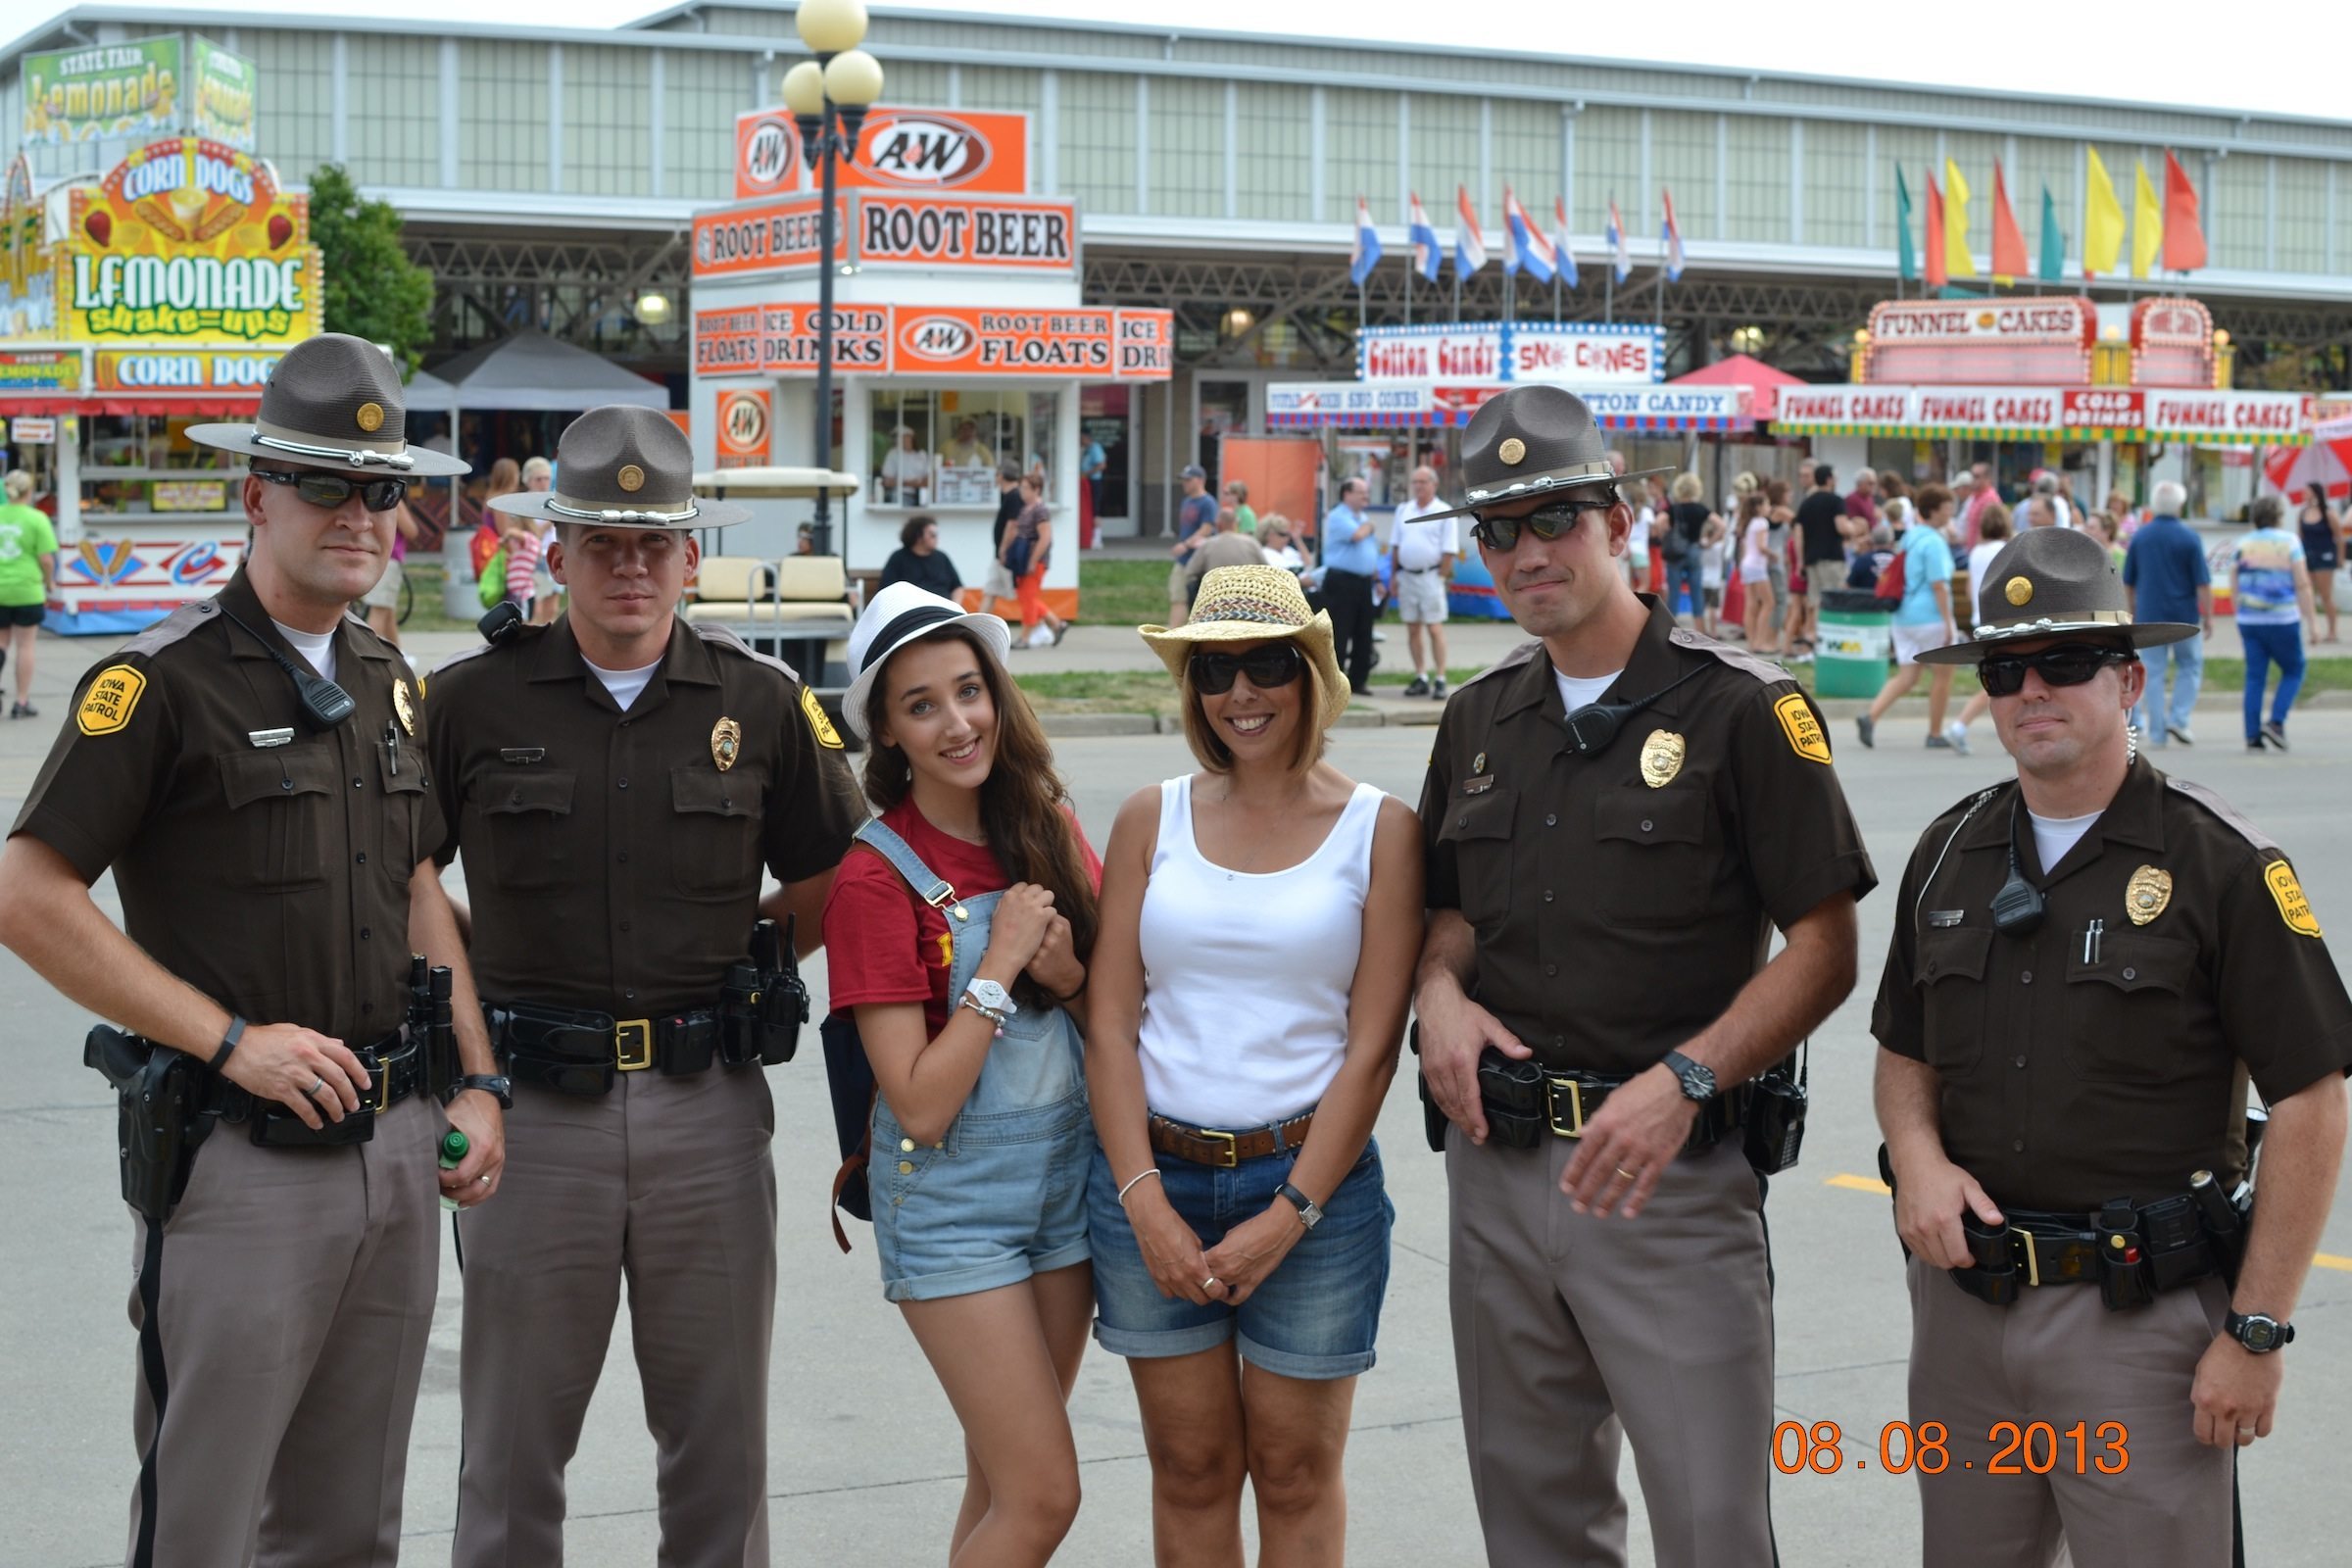 I had to ask for the State Patrol's permission to have a picture, and I wasn't even in it?!